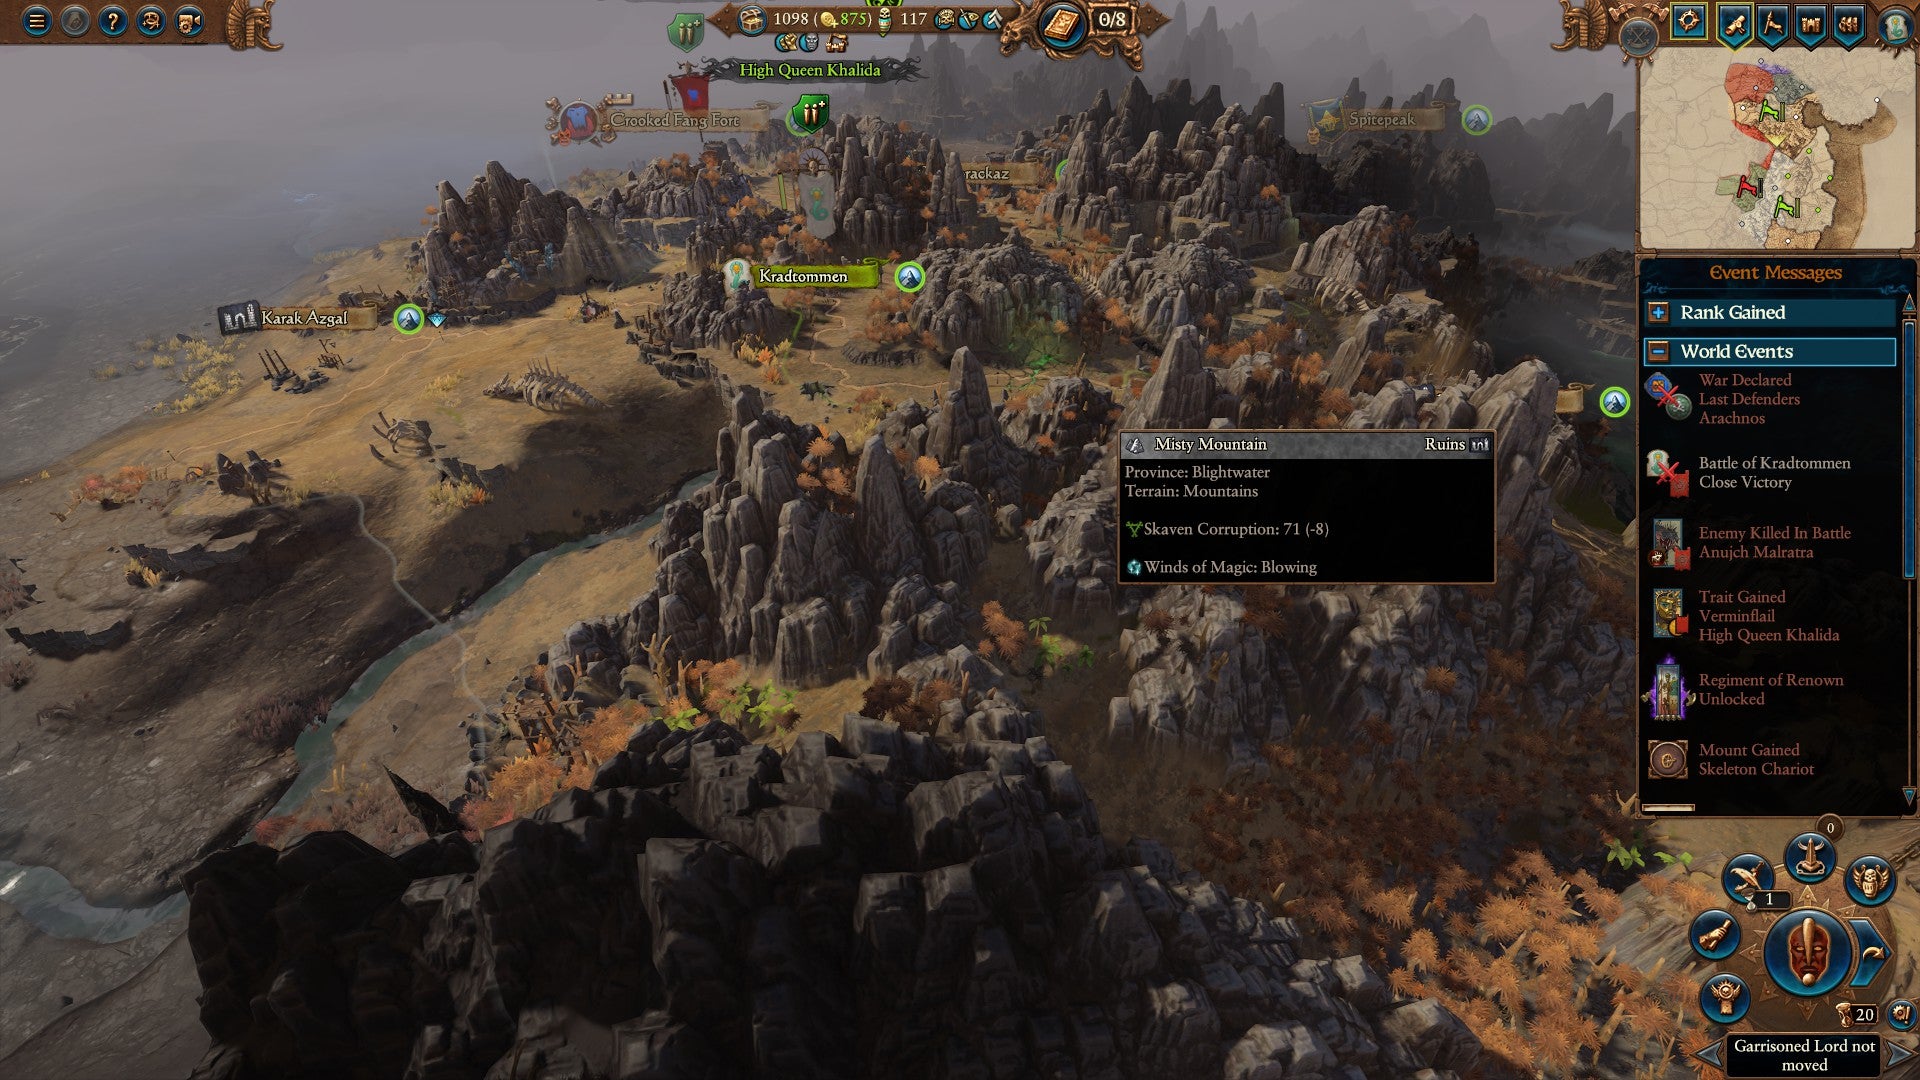 A partially zoomed-out view of a rocky desert area littered with bones in Total War Warhammer 3 Immortal Empires, showing the location of some different factions